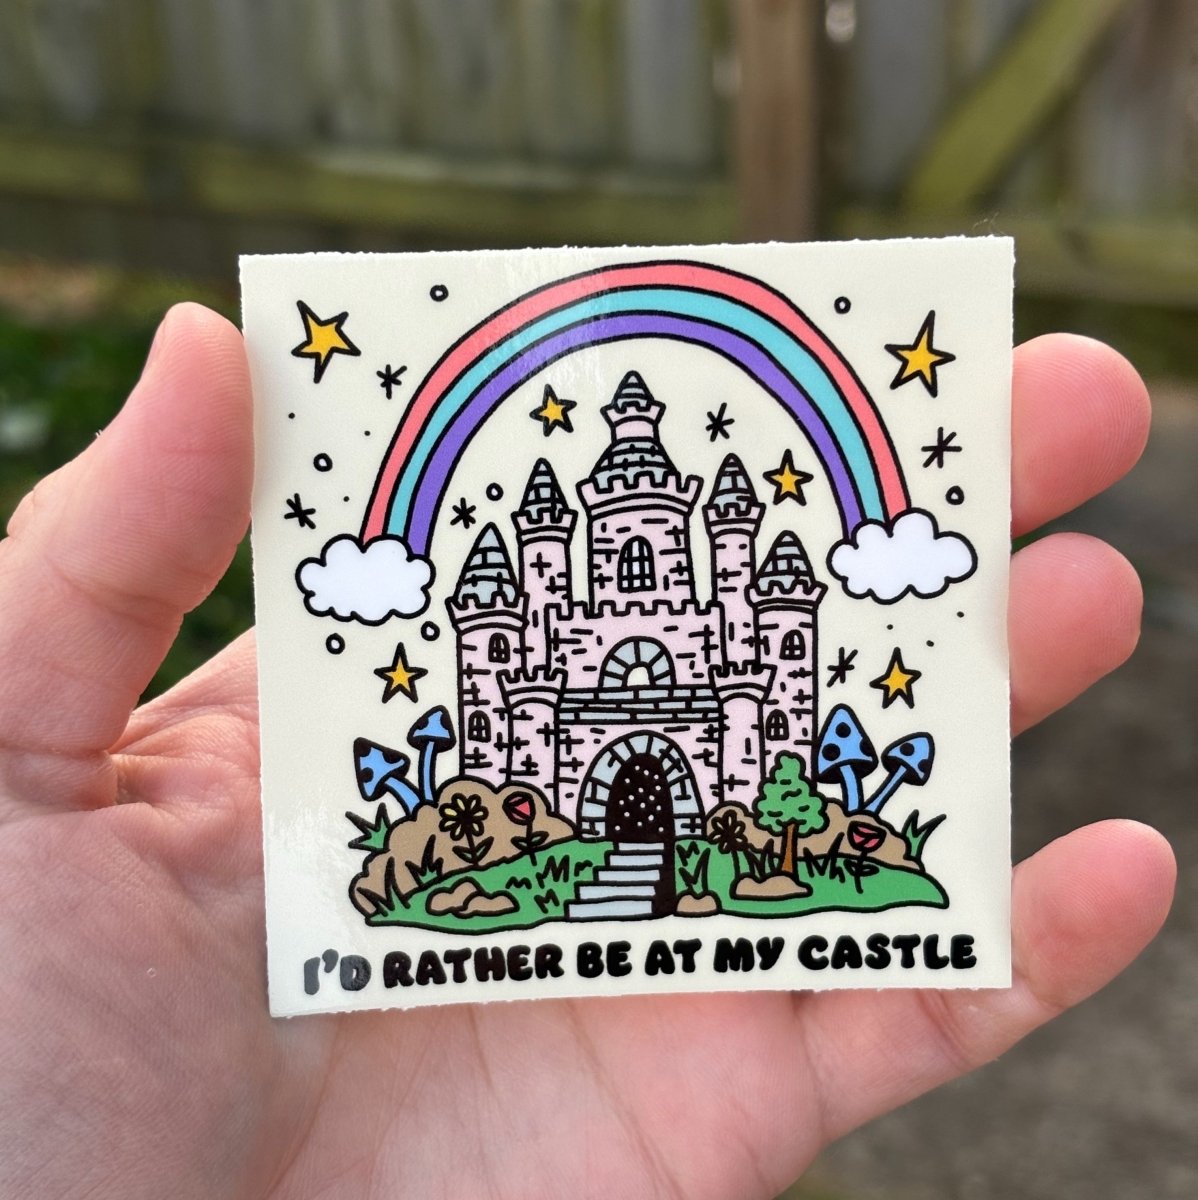 I'd rather be at my castle sticker - Sticker - Pretty Bad Co.